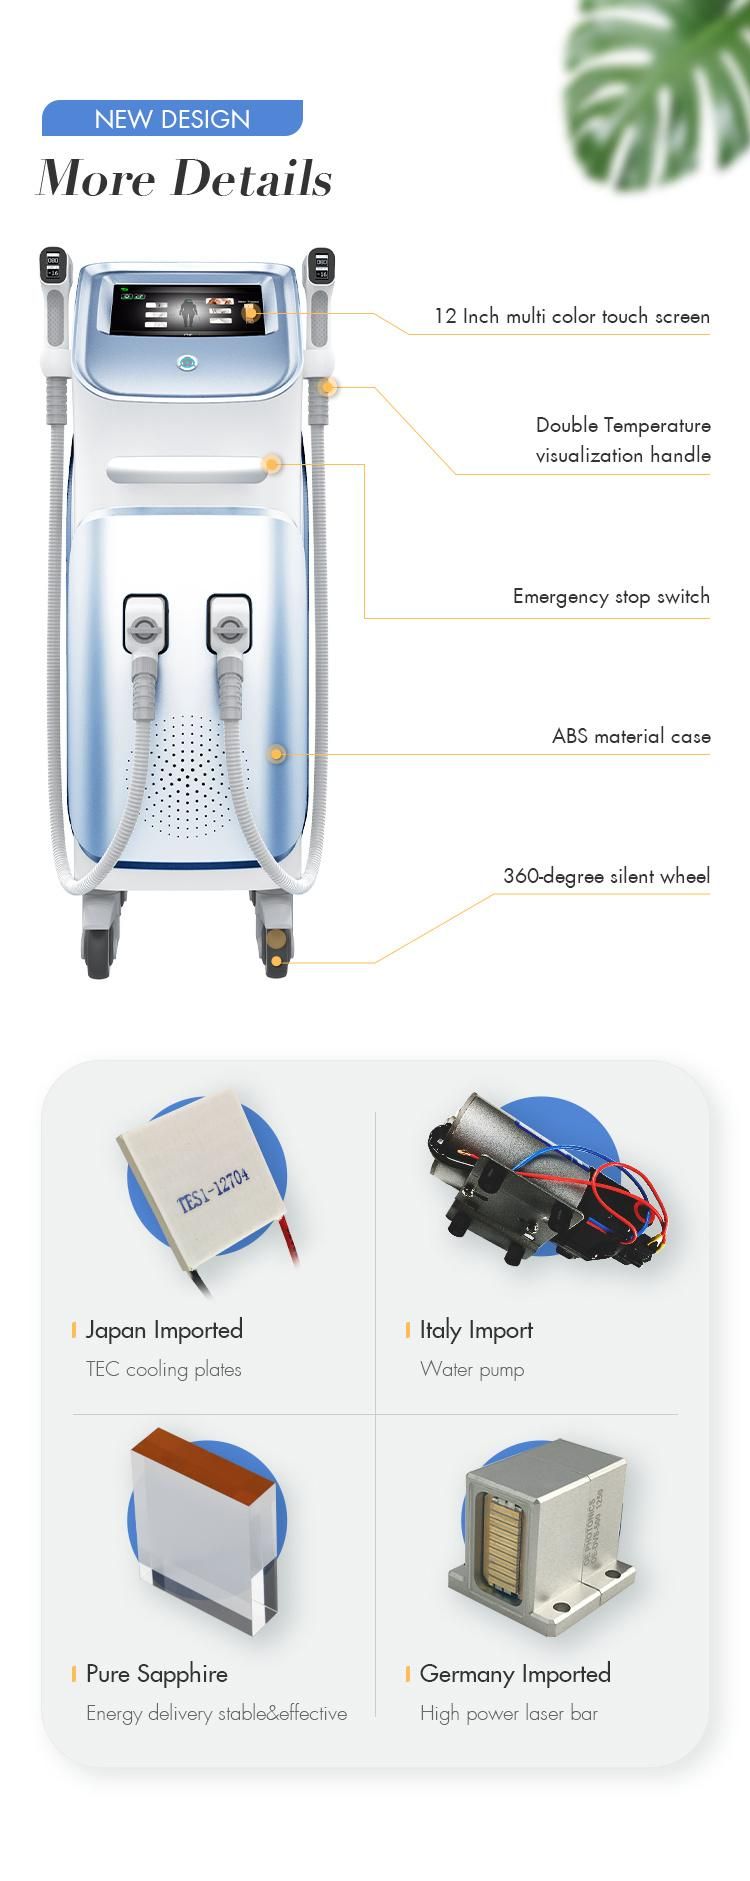 Double Handle 808 Diode Laser Hair Removal Machine